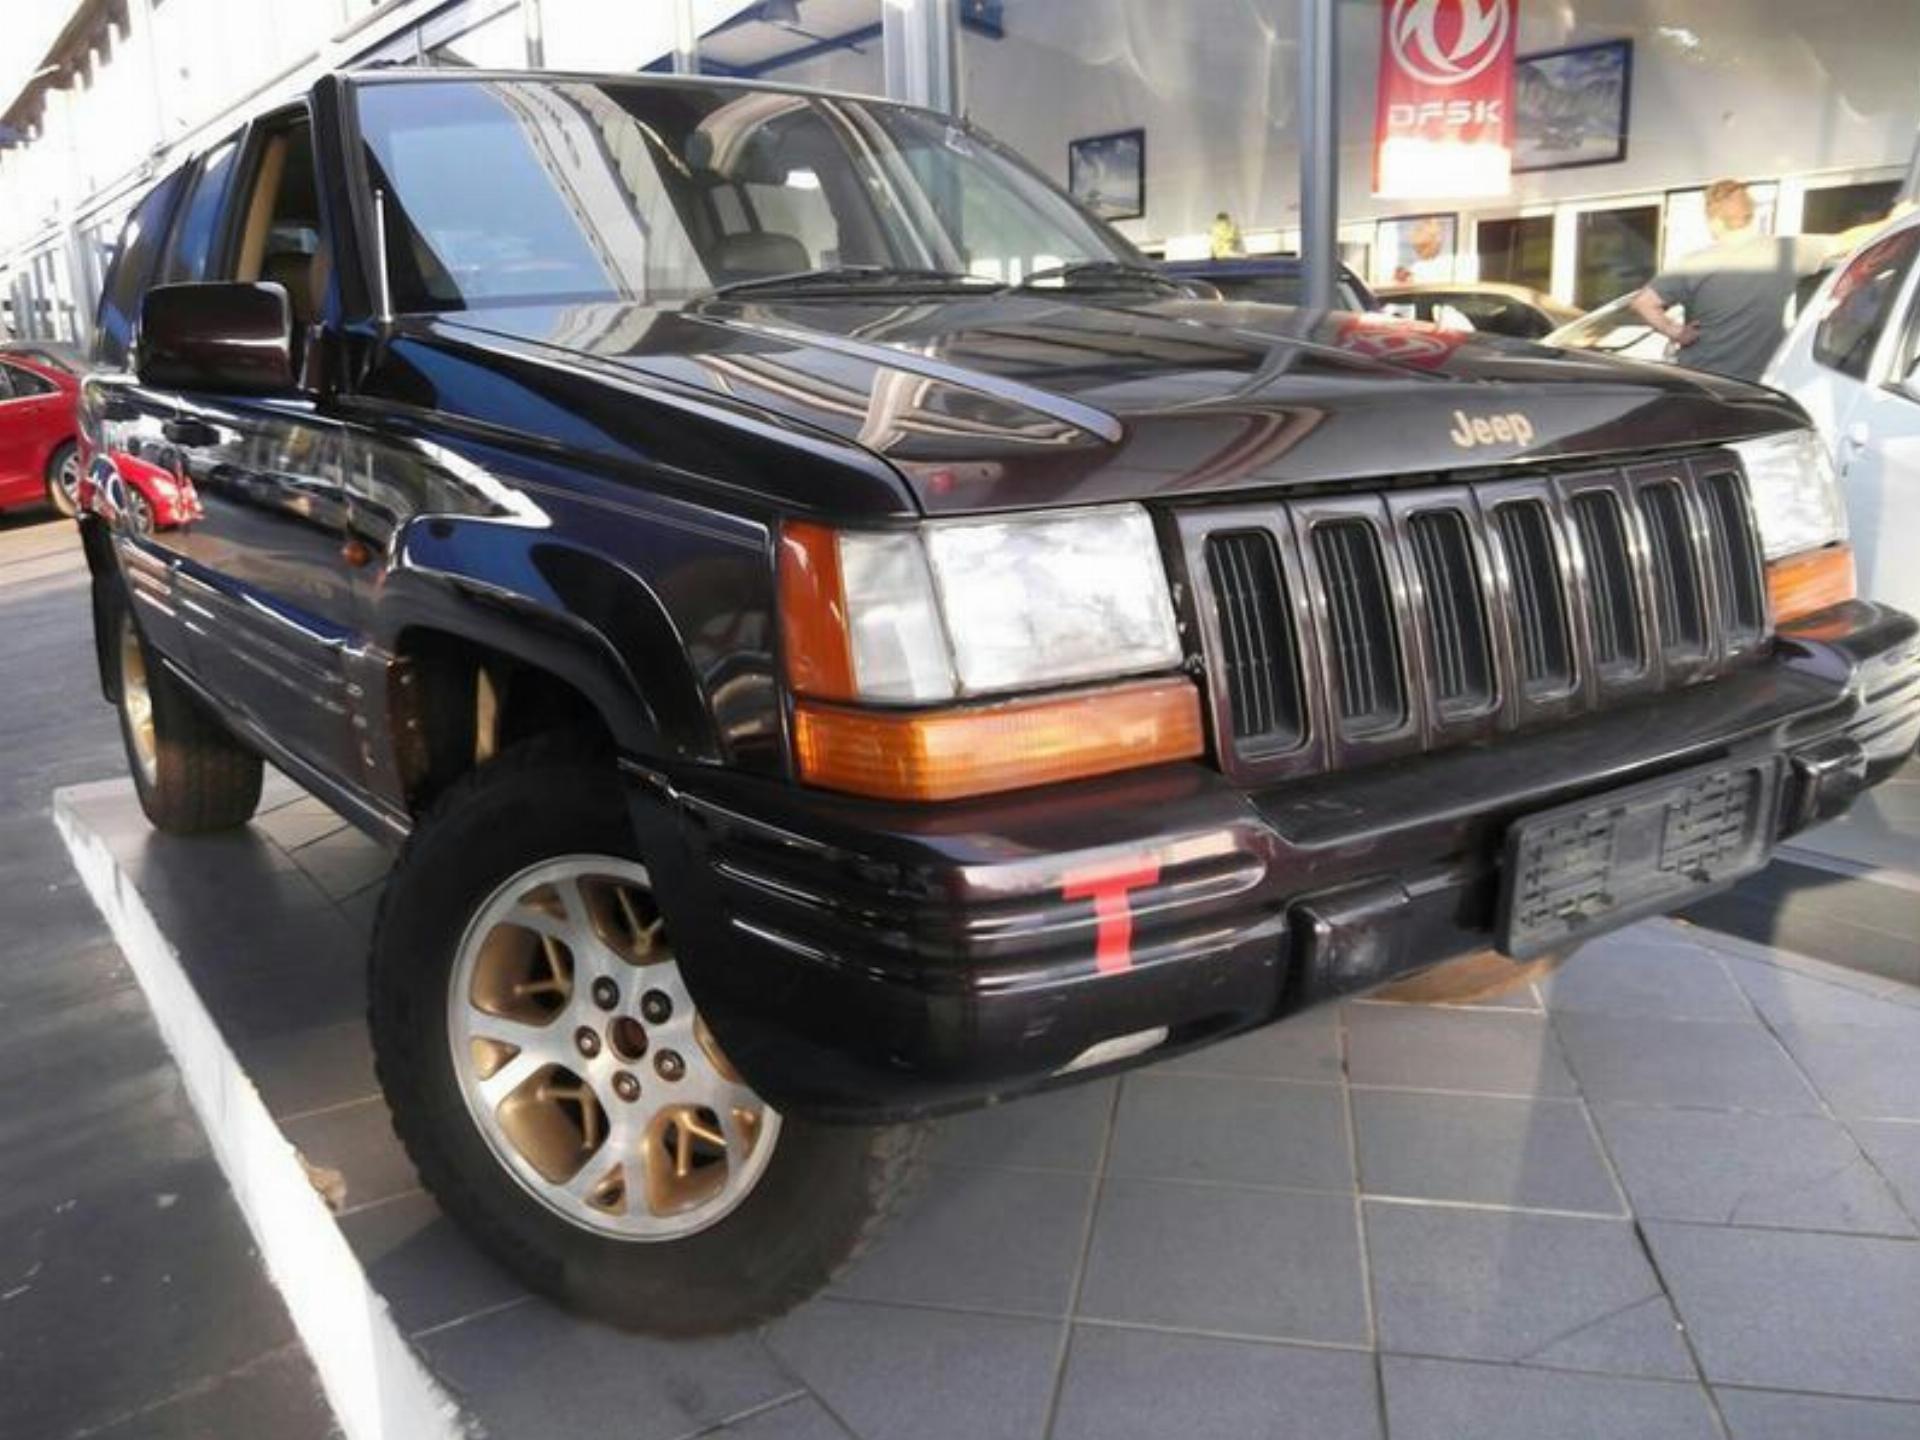 Used Jeep Grand Cherokee 5.2 V8 LHD 4X4 1995 on auction